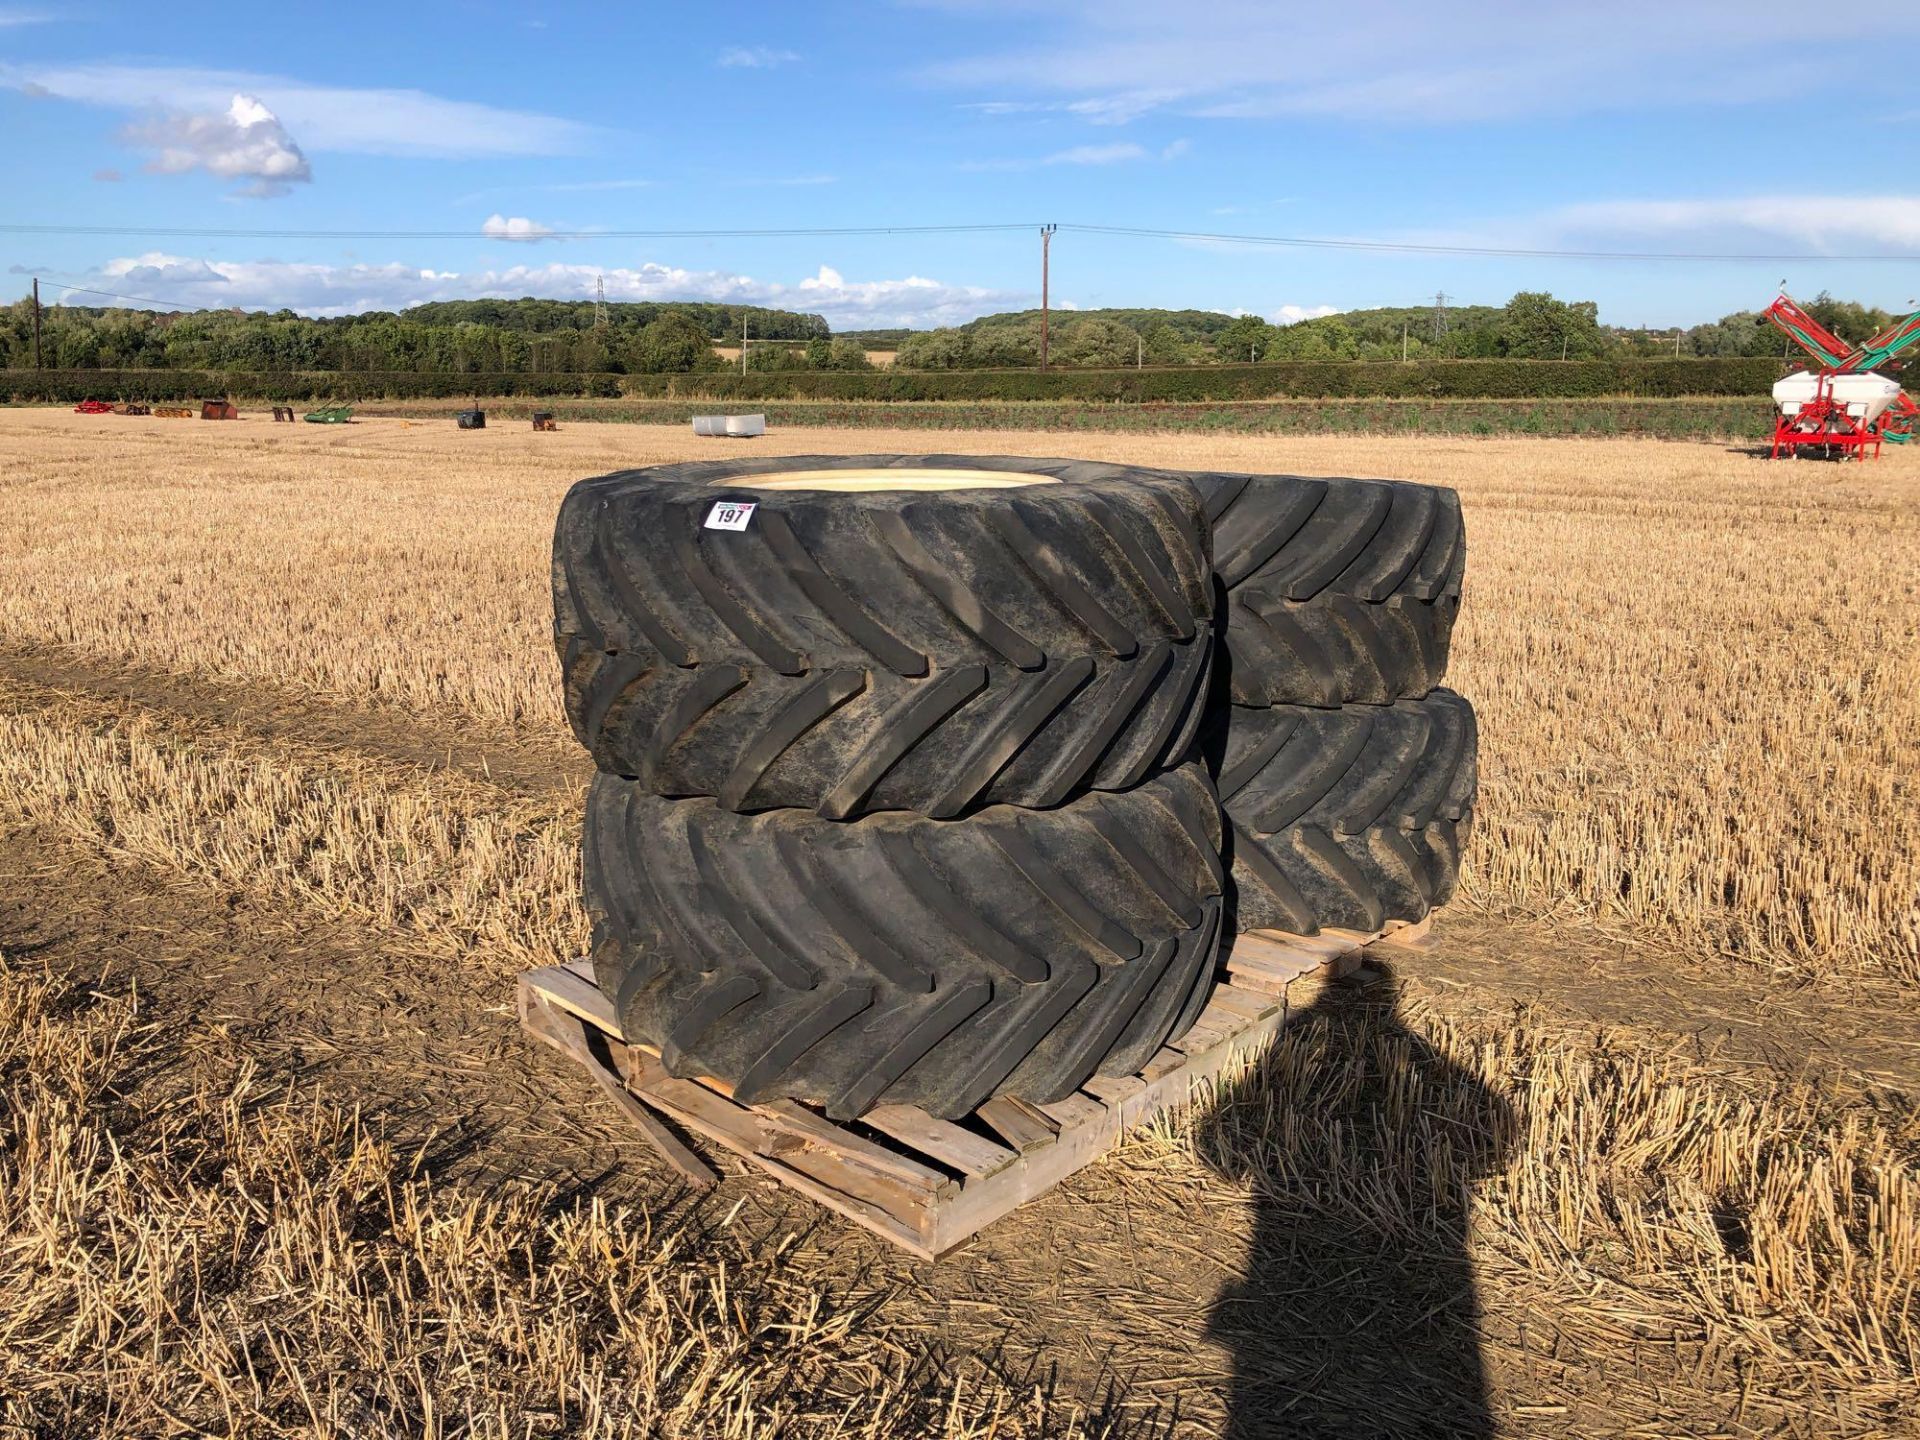 Set Michelin 600/60R28 wheels and tyres to suit Househam Merlin sprayer